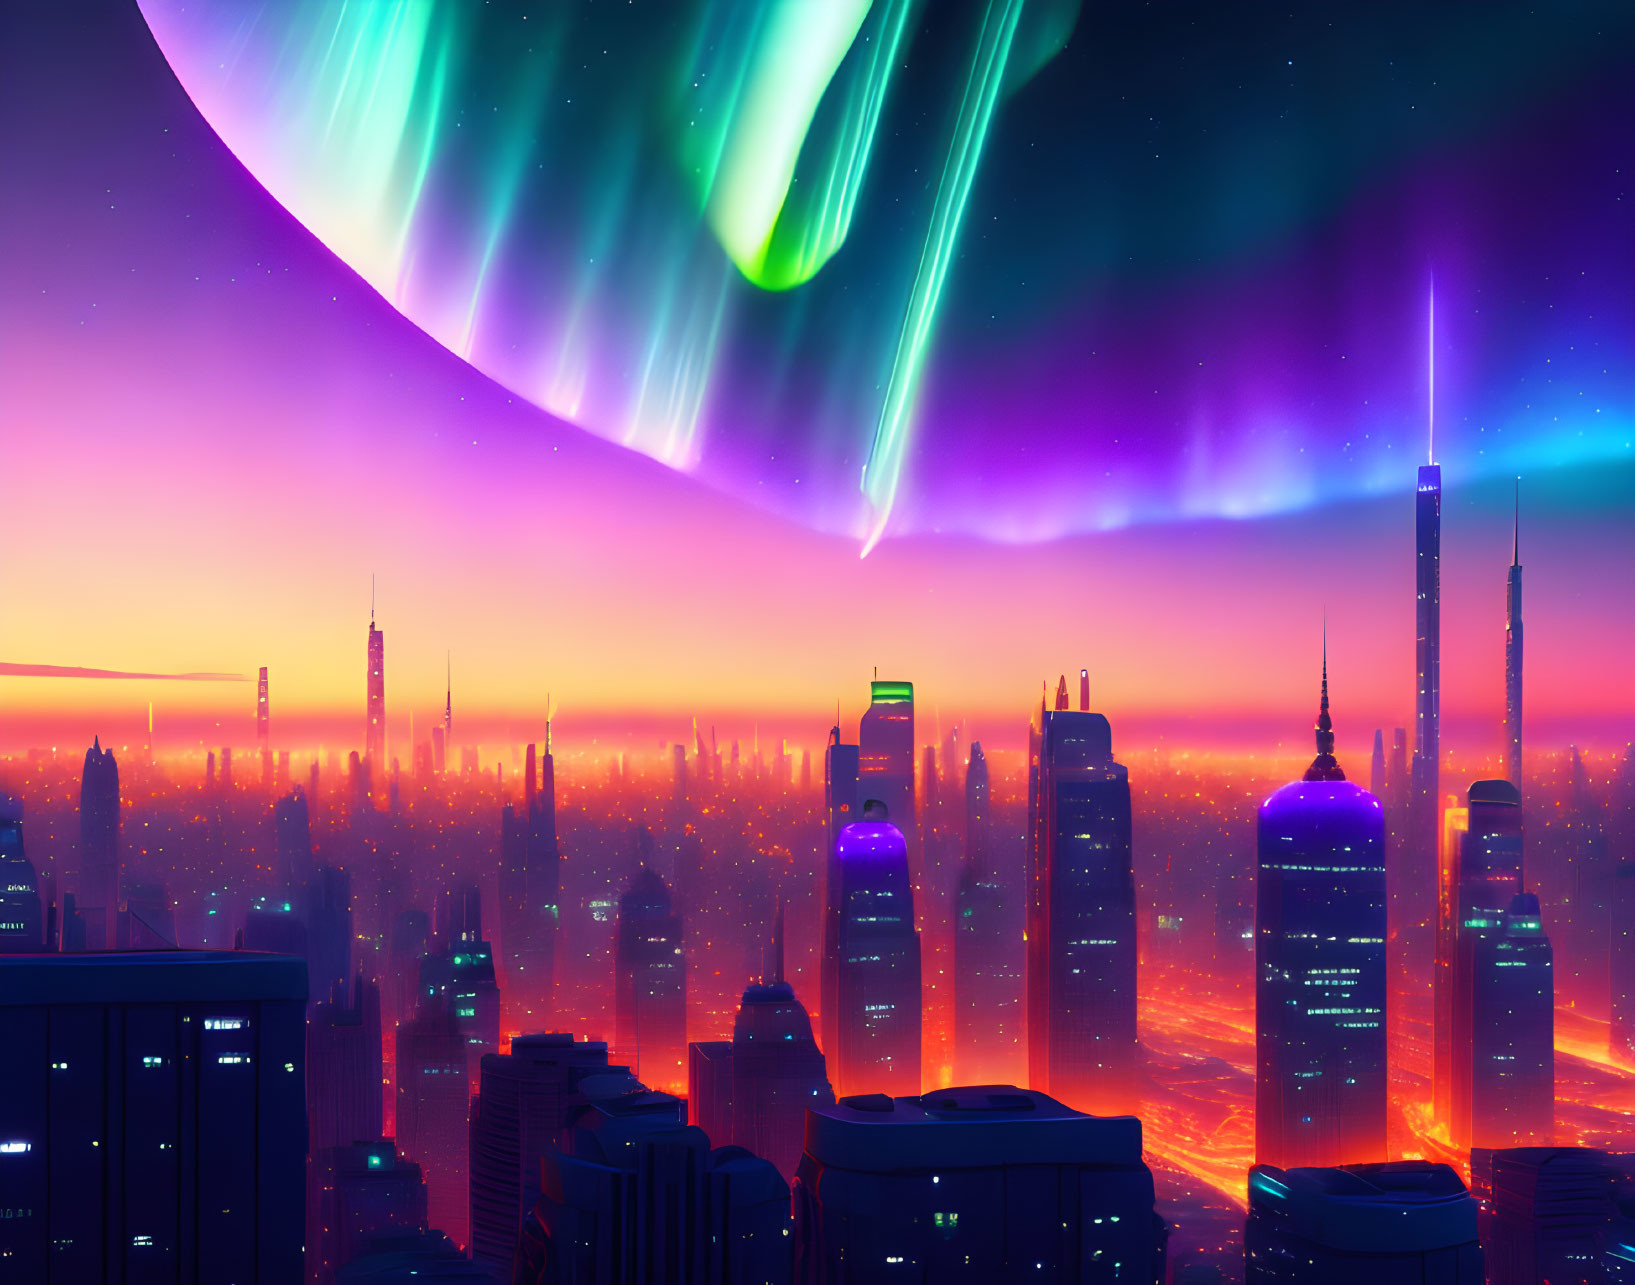 Futuristic cityscape at dusk with towering skyscrapers and giant planet.